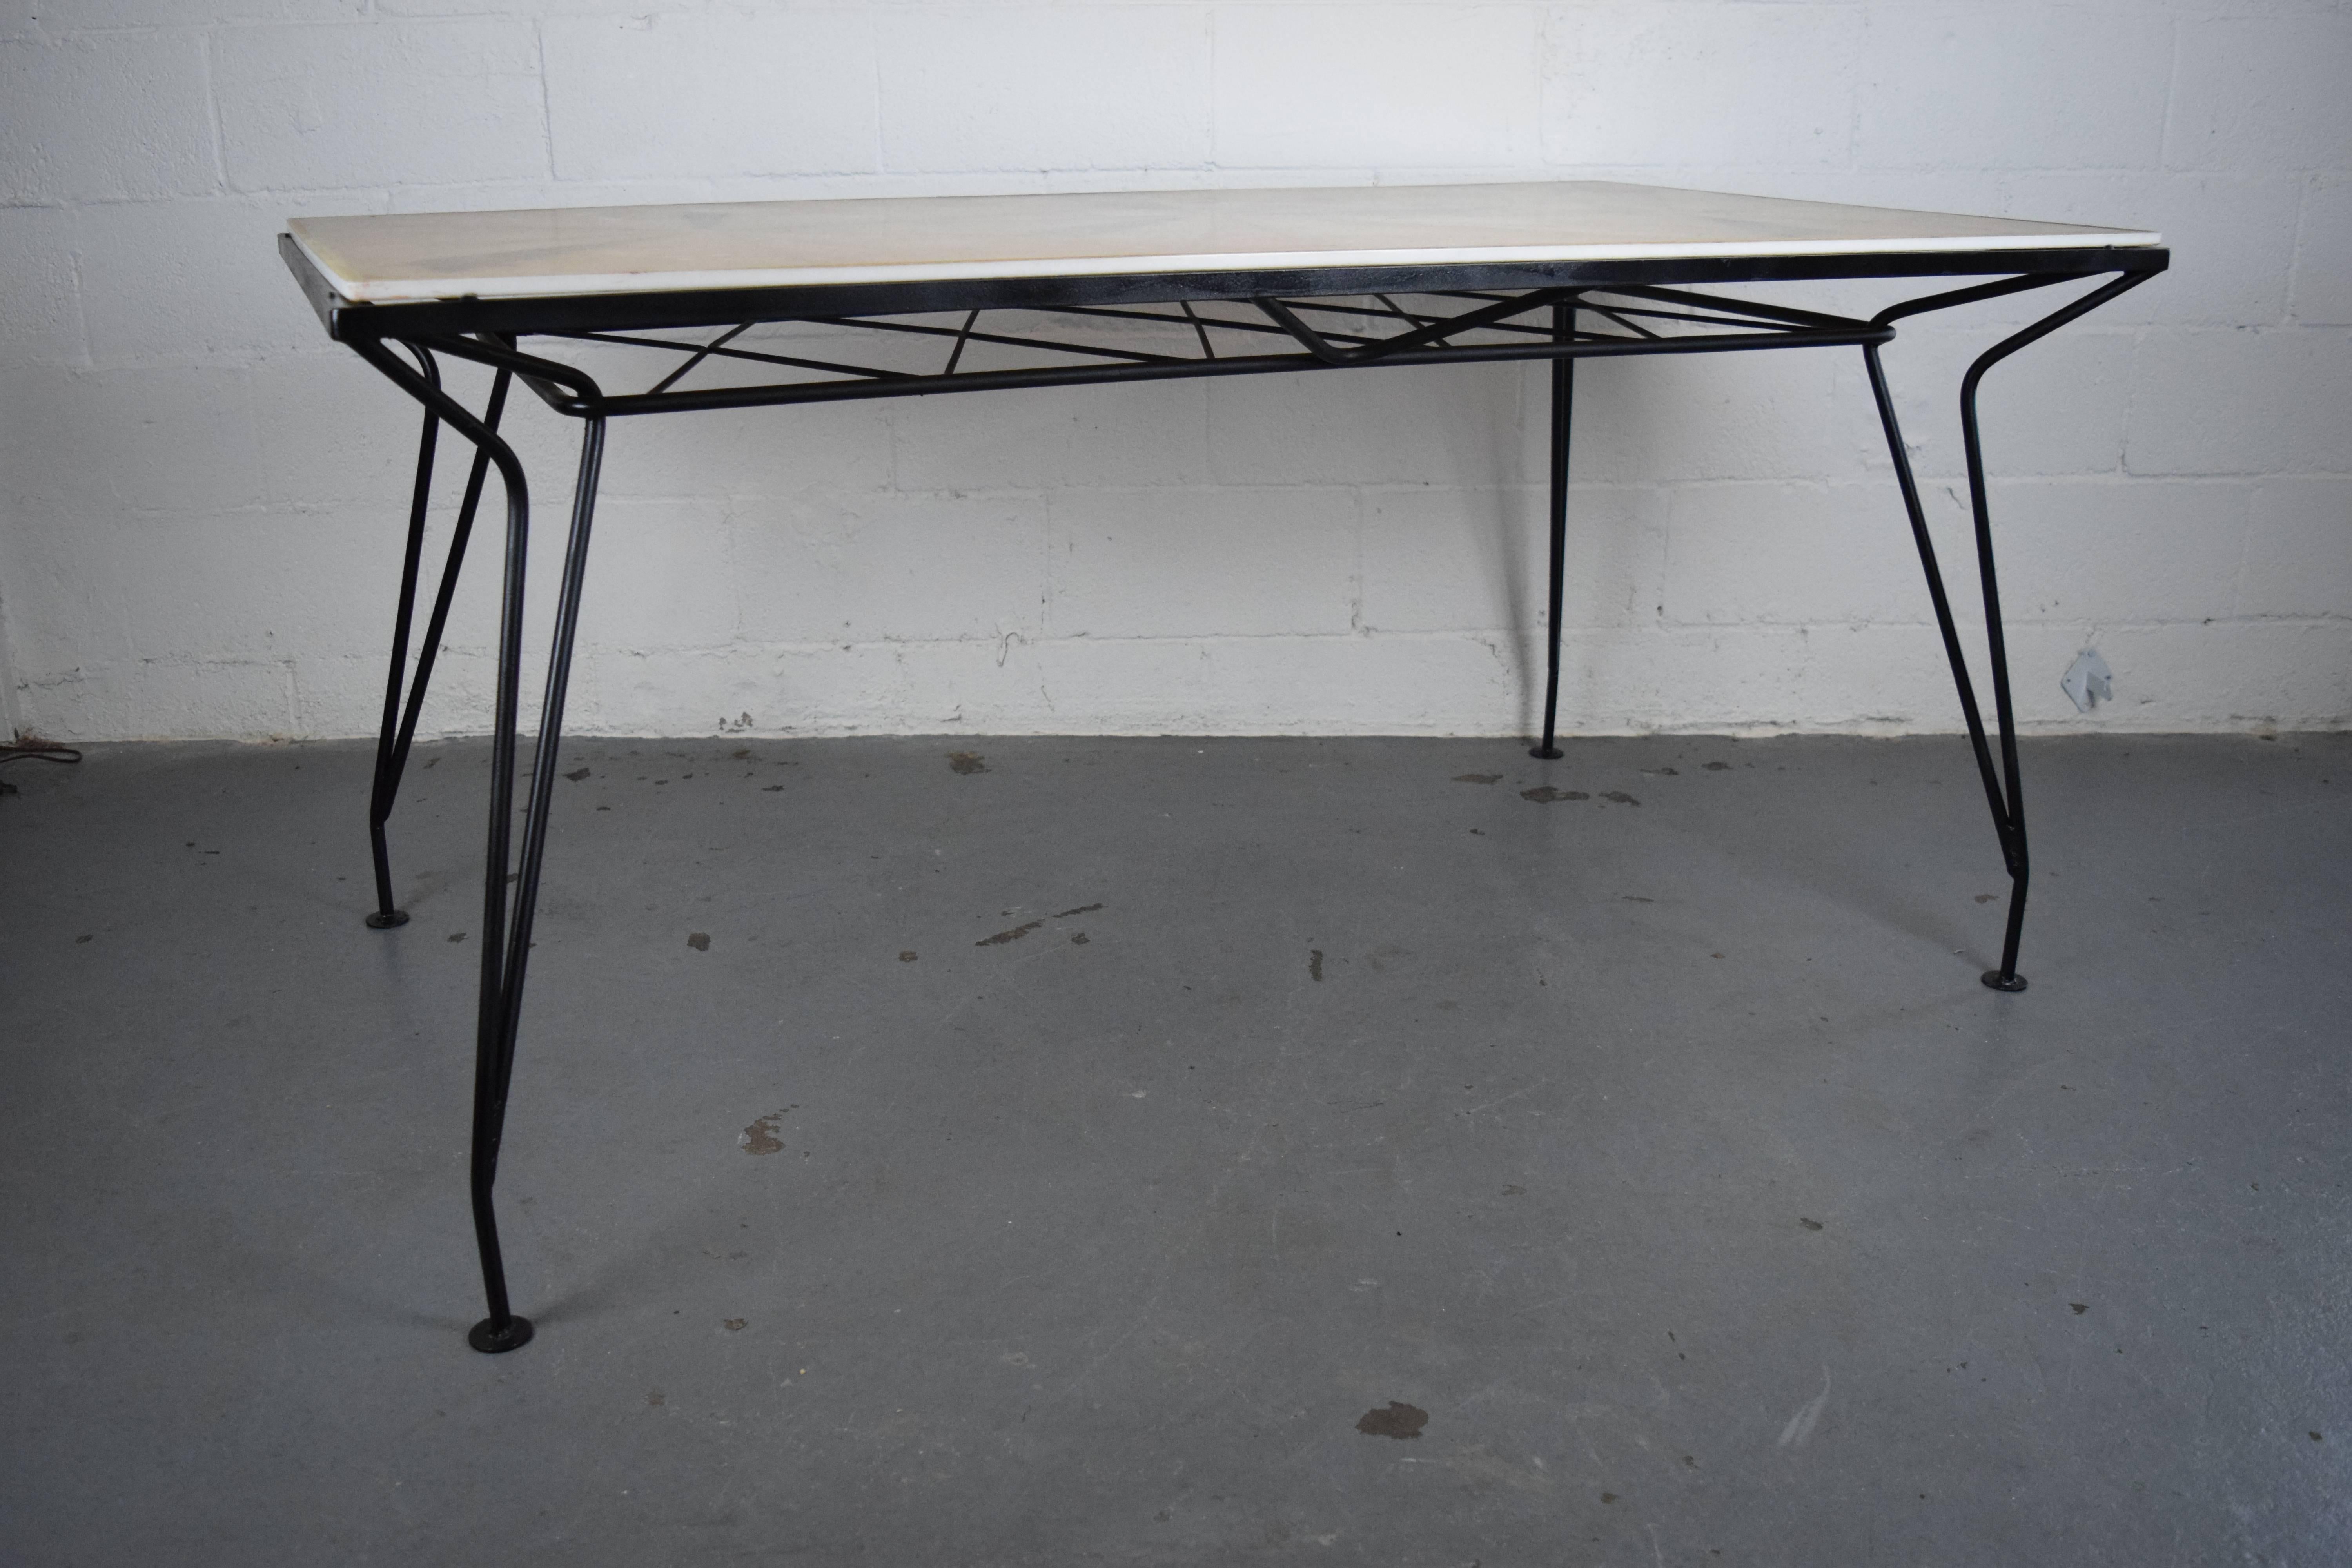 1950s iron patio table designed by Maurizio Tempestini for Salterini with a custom fiberglass and resin top. The base has been restored. Some wear on the tabletop - please see pictures.